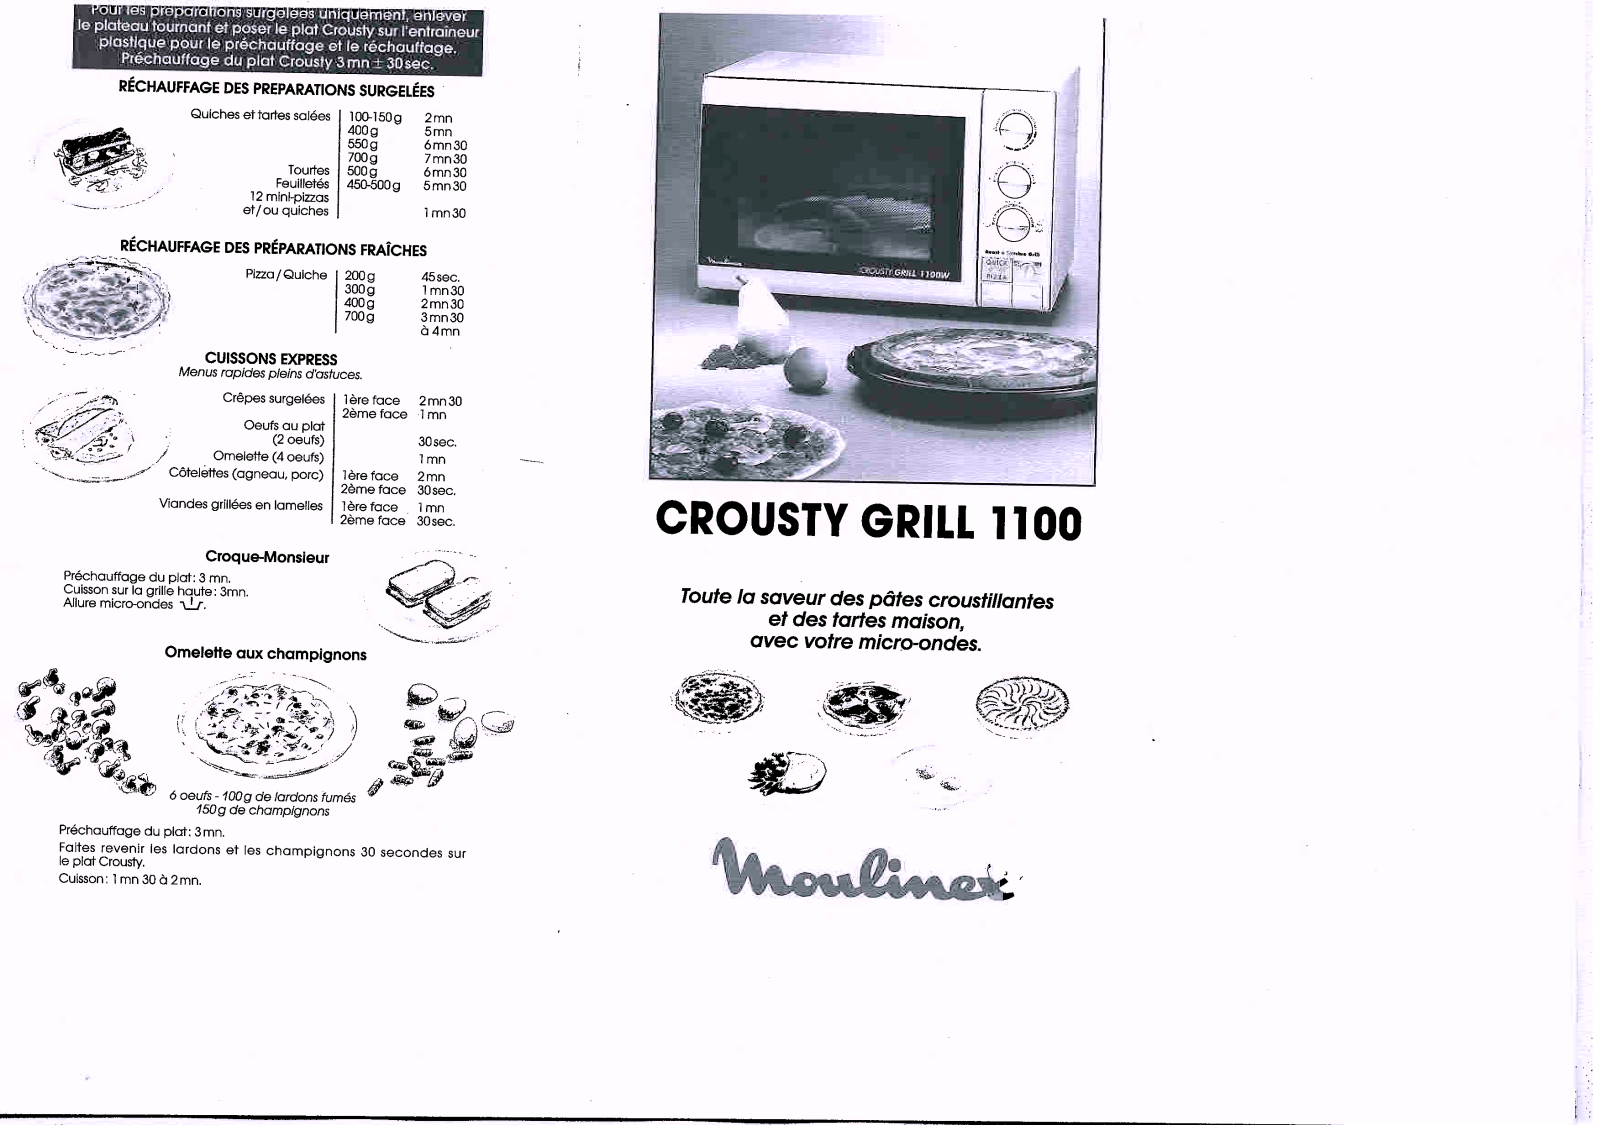 MOULINEX CROUSTY GRILL User Manual